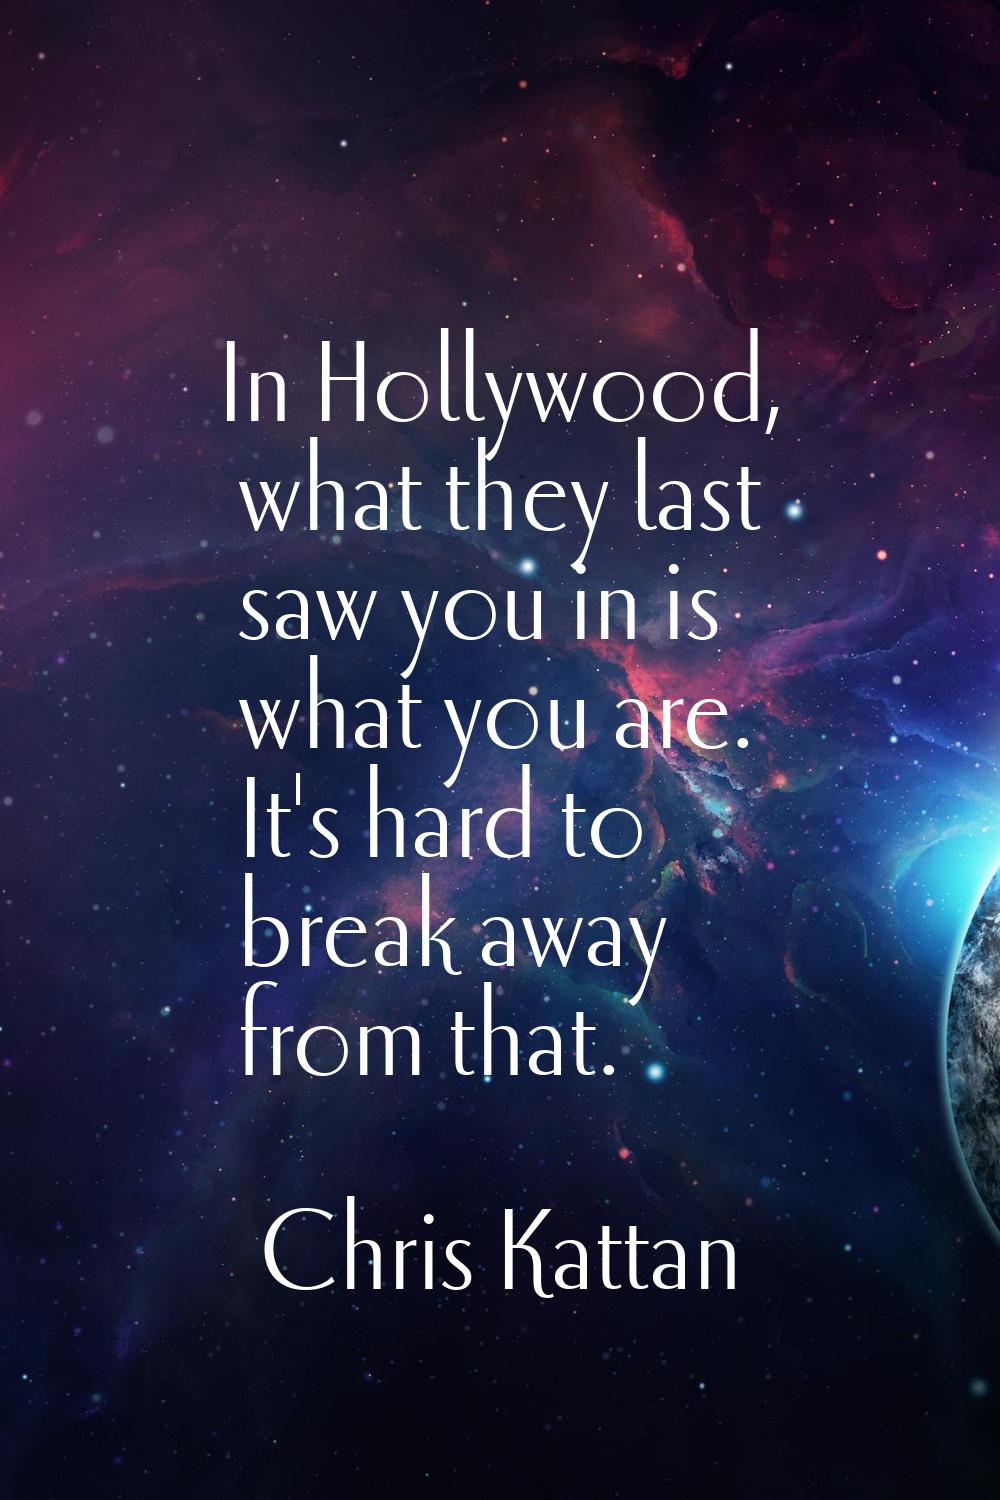 In Hollywood, what they last saw you in is what you are. It's hard to break away from that.